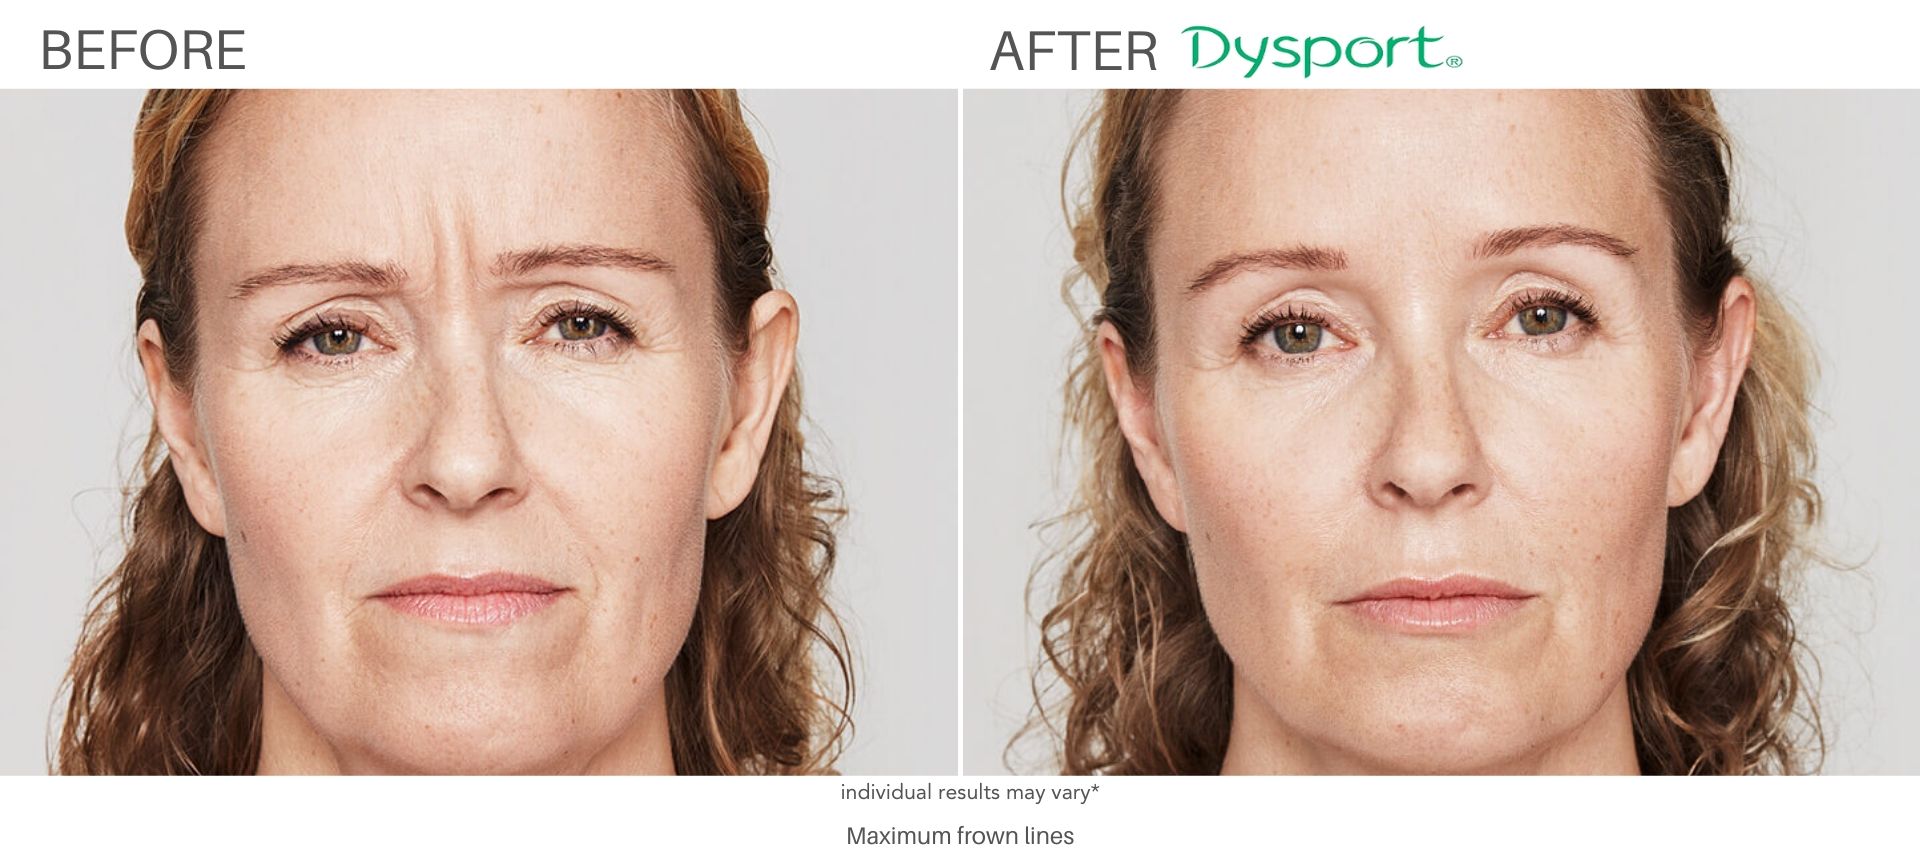 dysport before and after treatment cliffside skin and laser nj